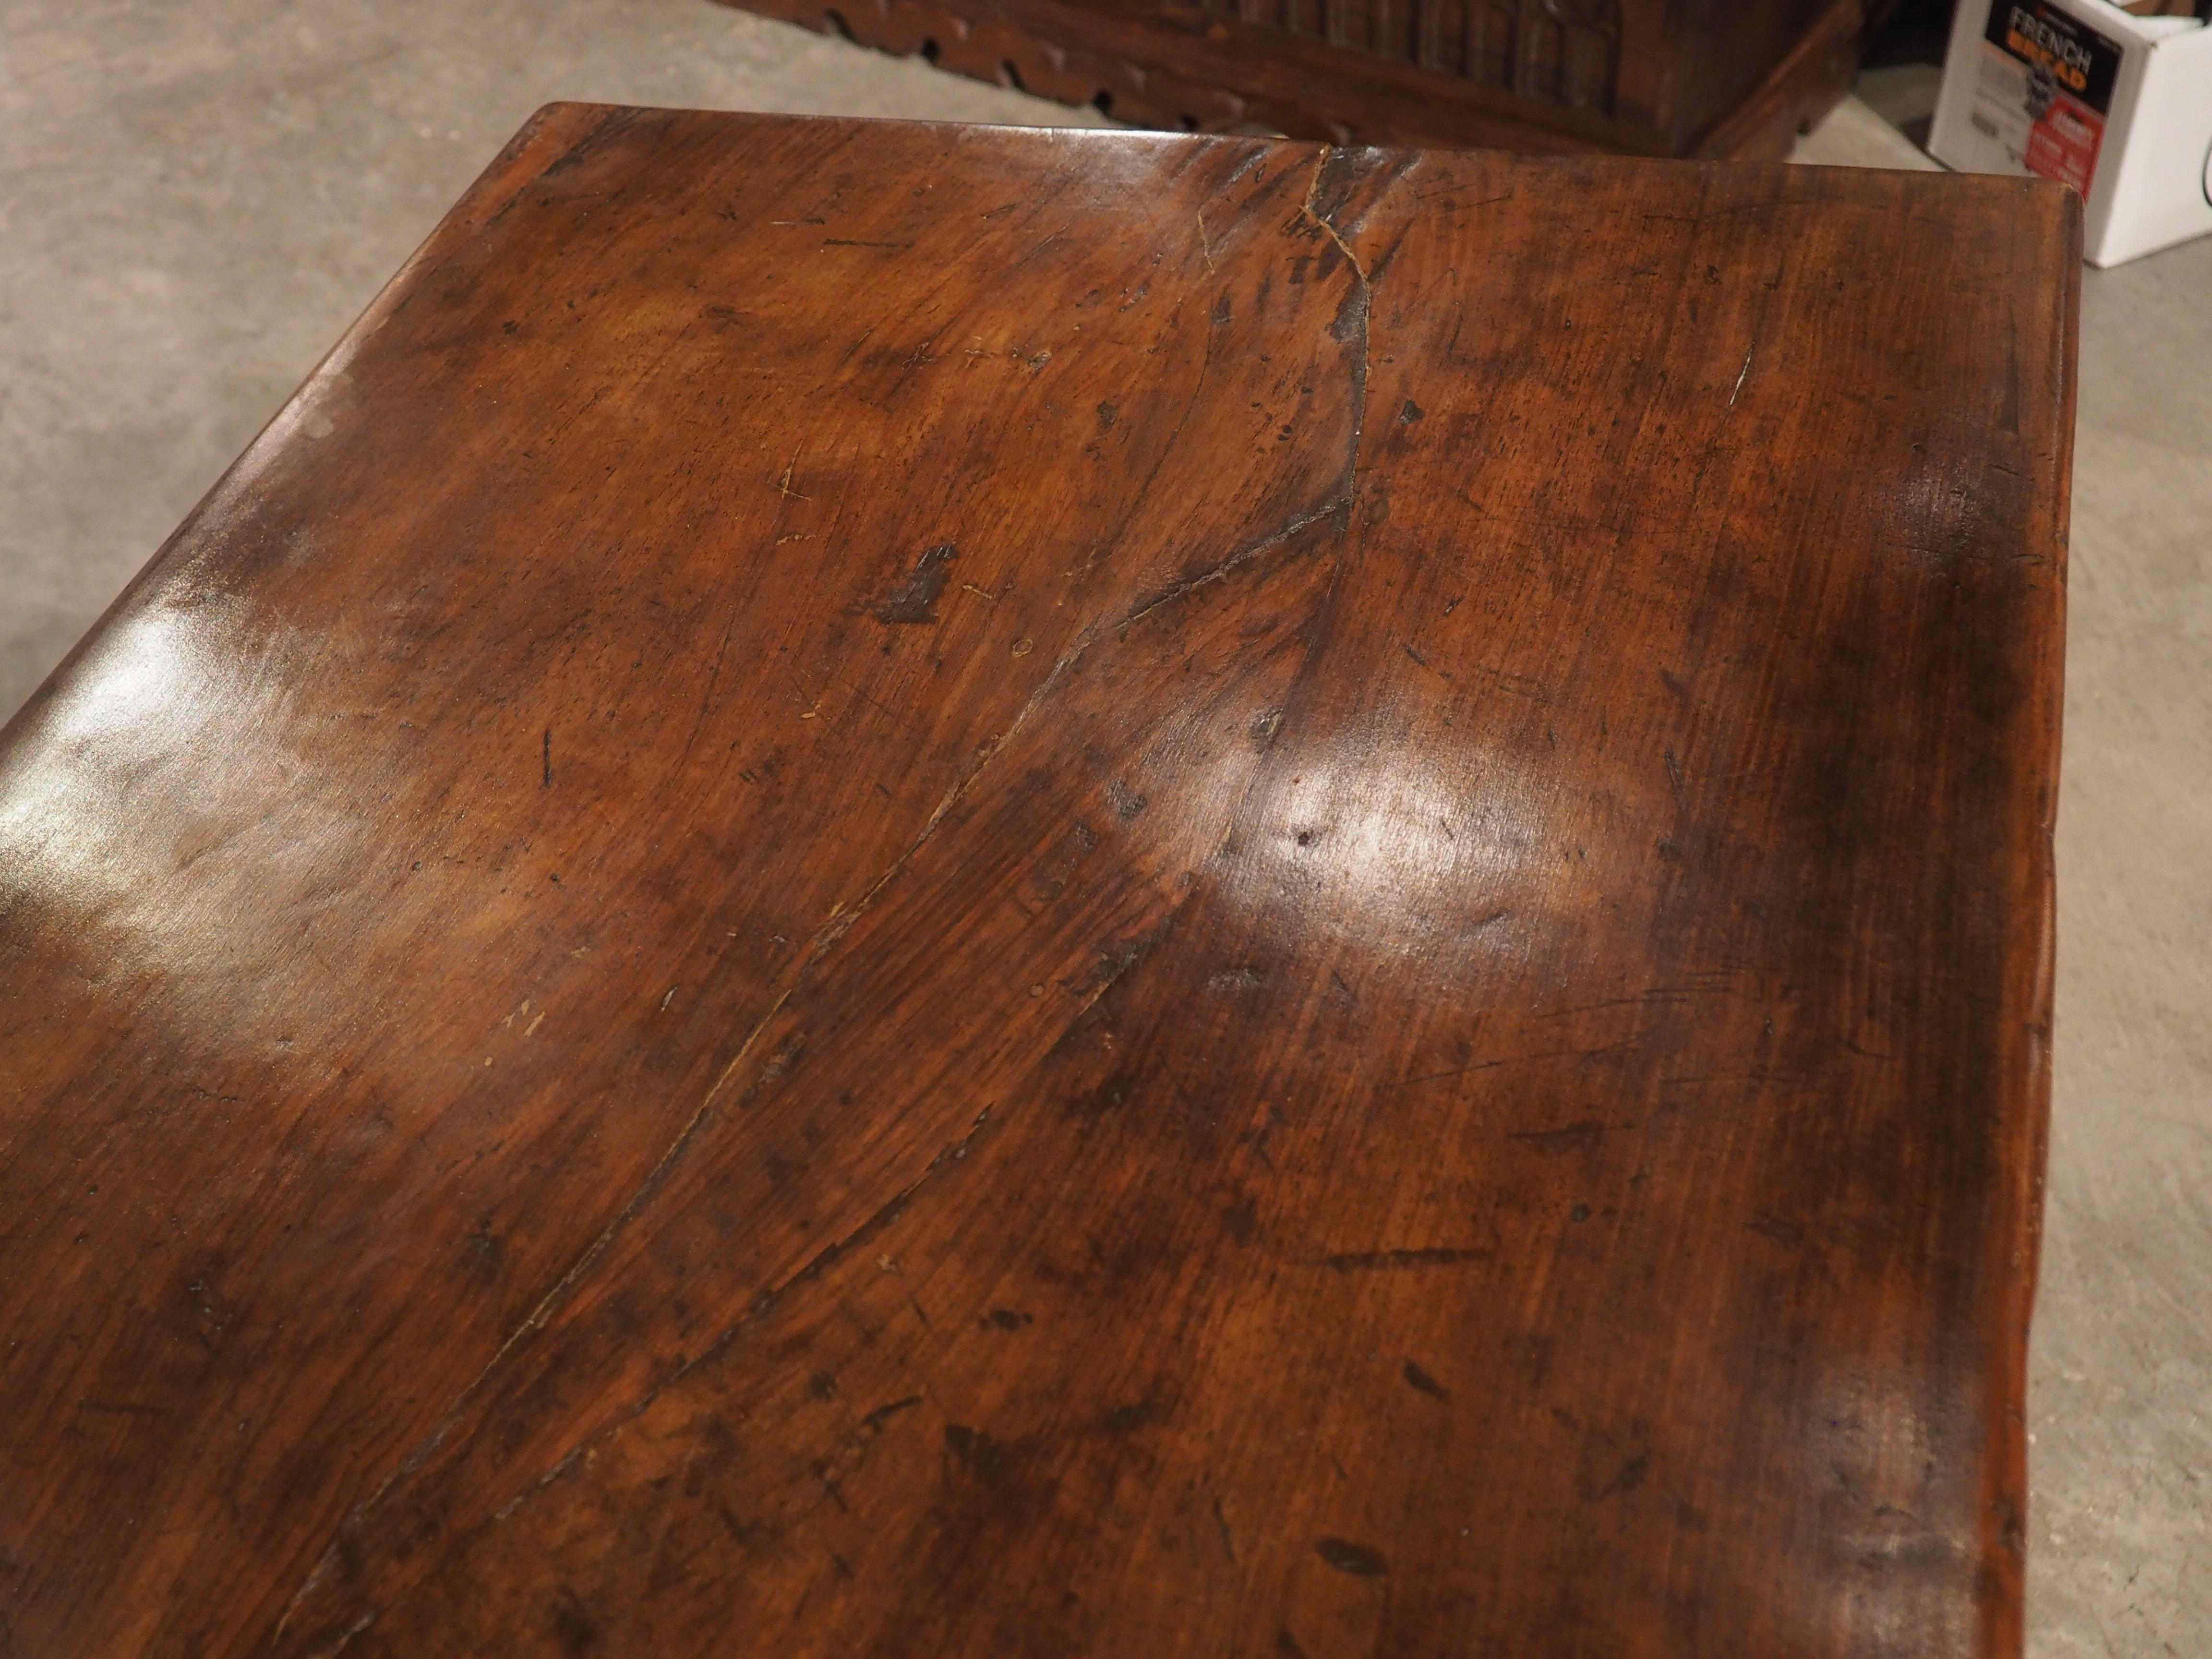 Baroque Long 17th Century Single Walnut Plank Refectory Table from Tuscany, Italy For Sale